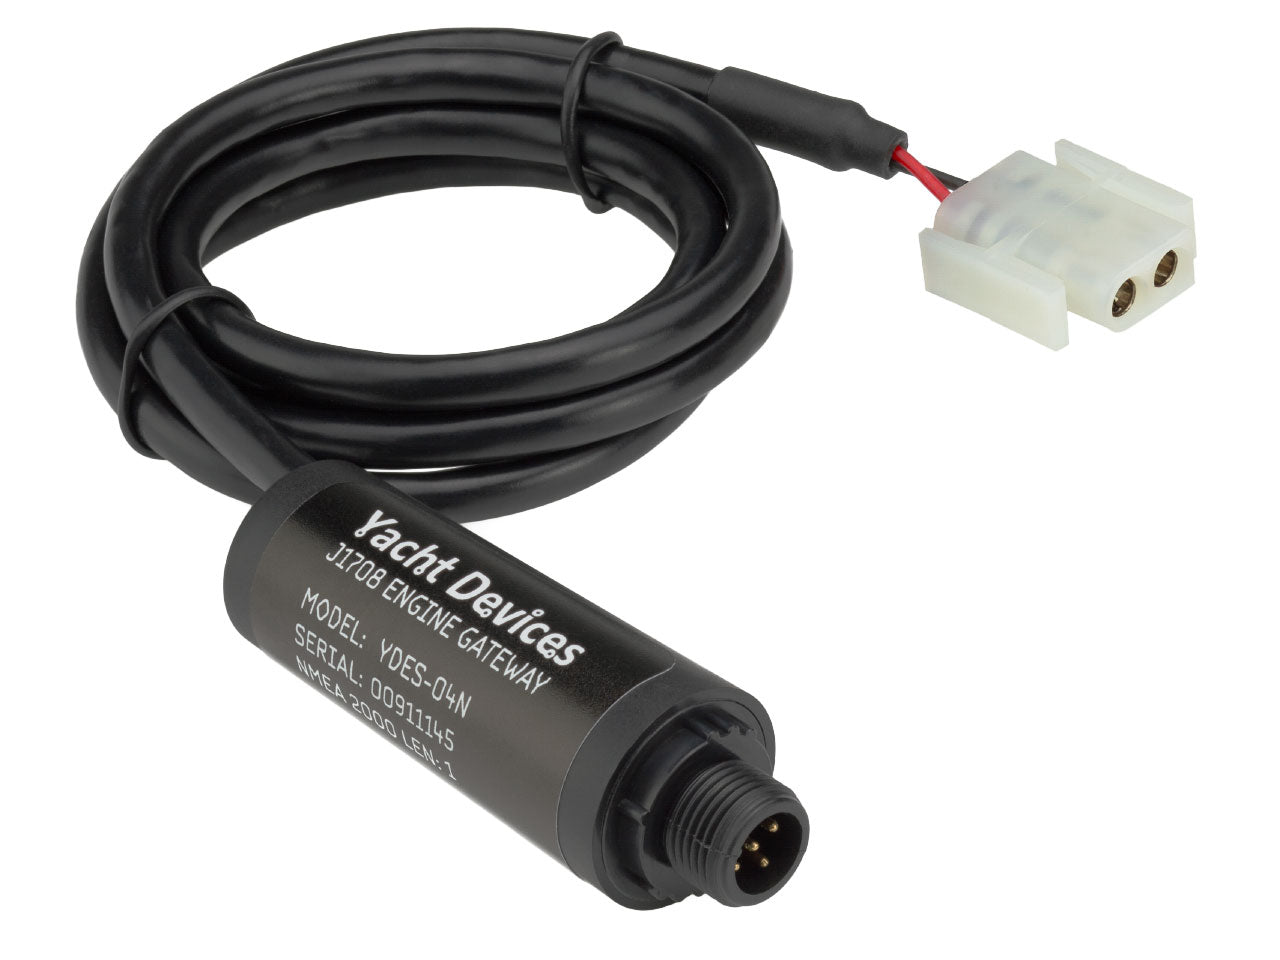 J1708 Engine Gateway YDES-04 - Compatible with NMEA 2000 (DeviceNet) Micro Male - 2 Dogs Marine